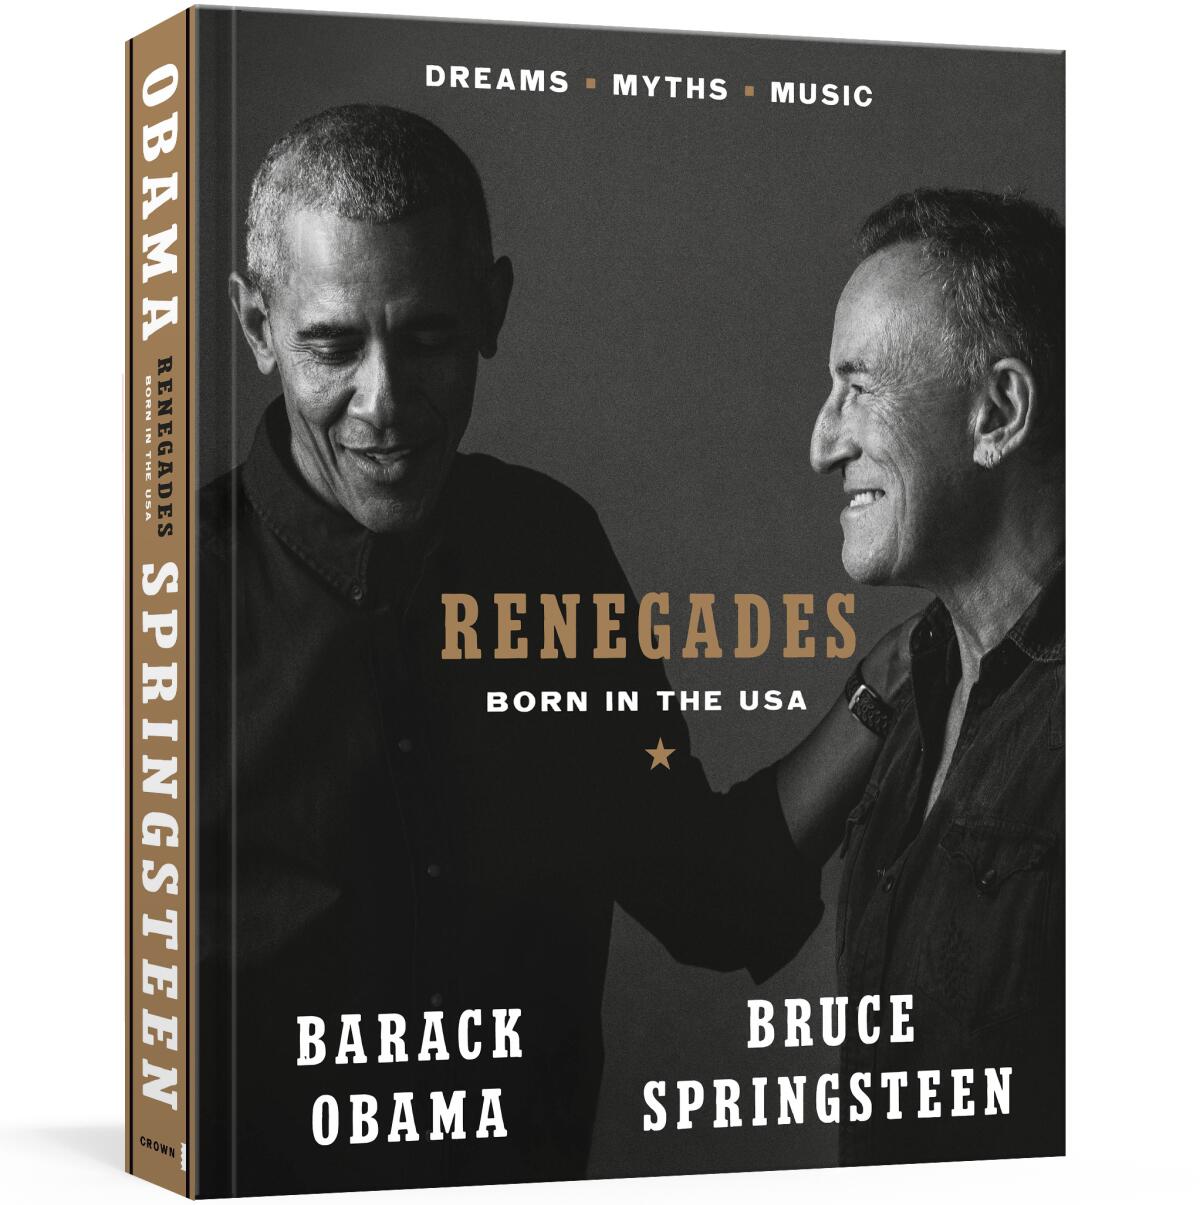 A book cover shows Barack Obama and Bruce Springsteen